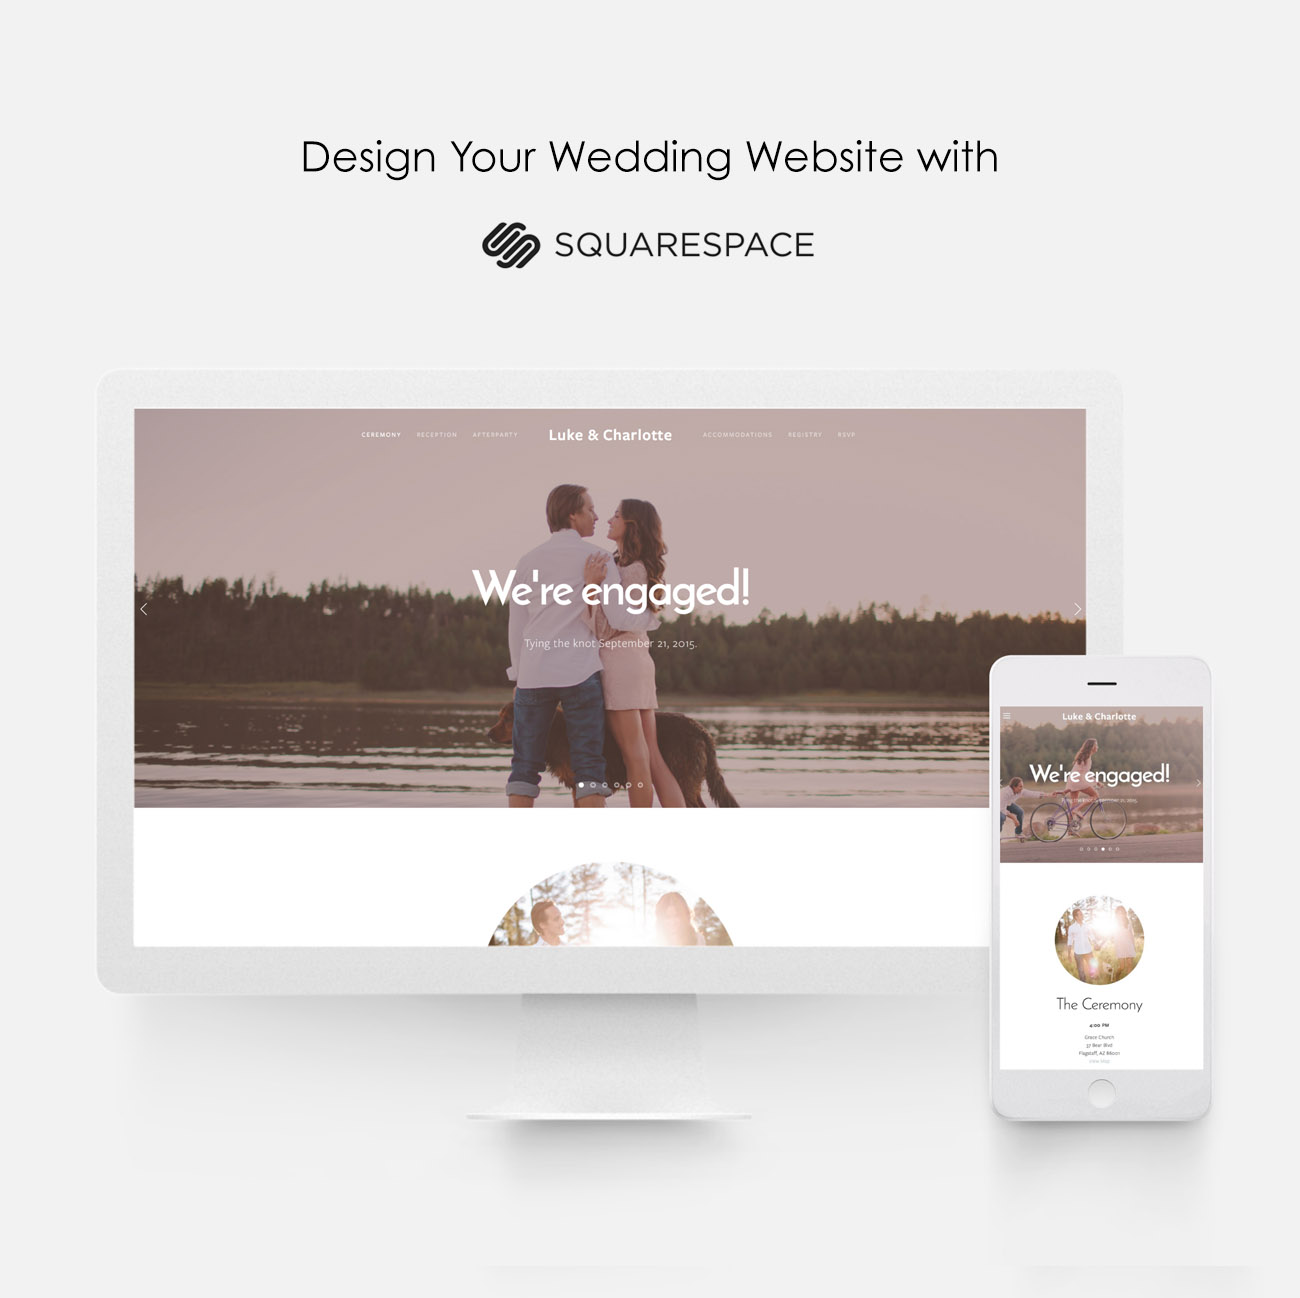 Squarespace for your Wedding Website